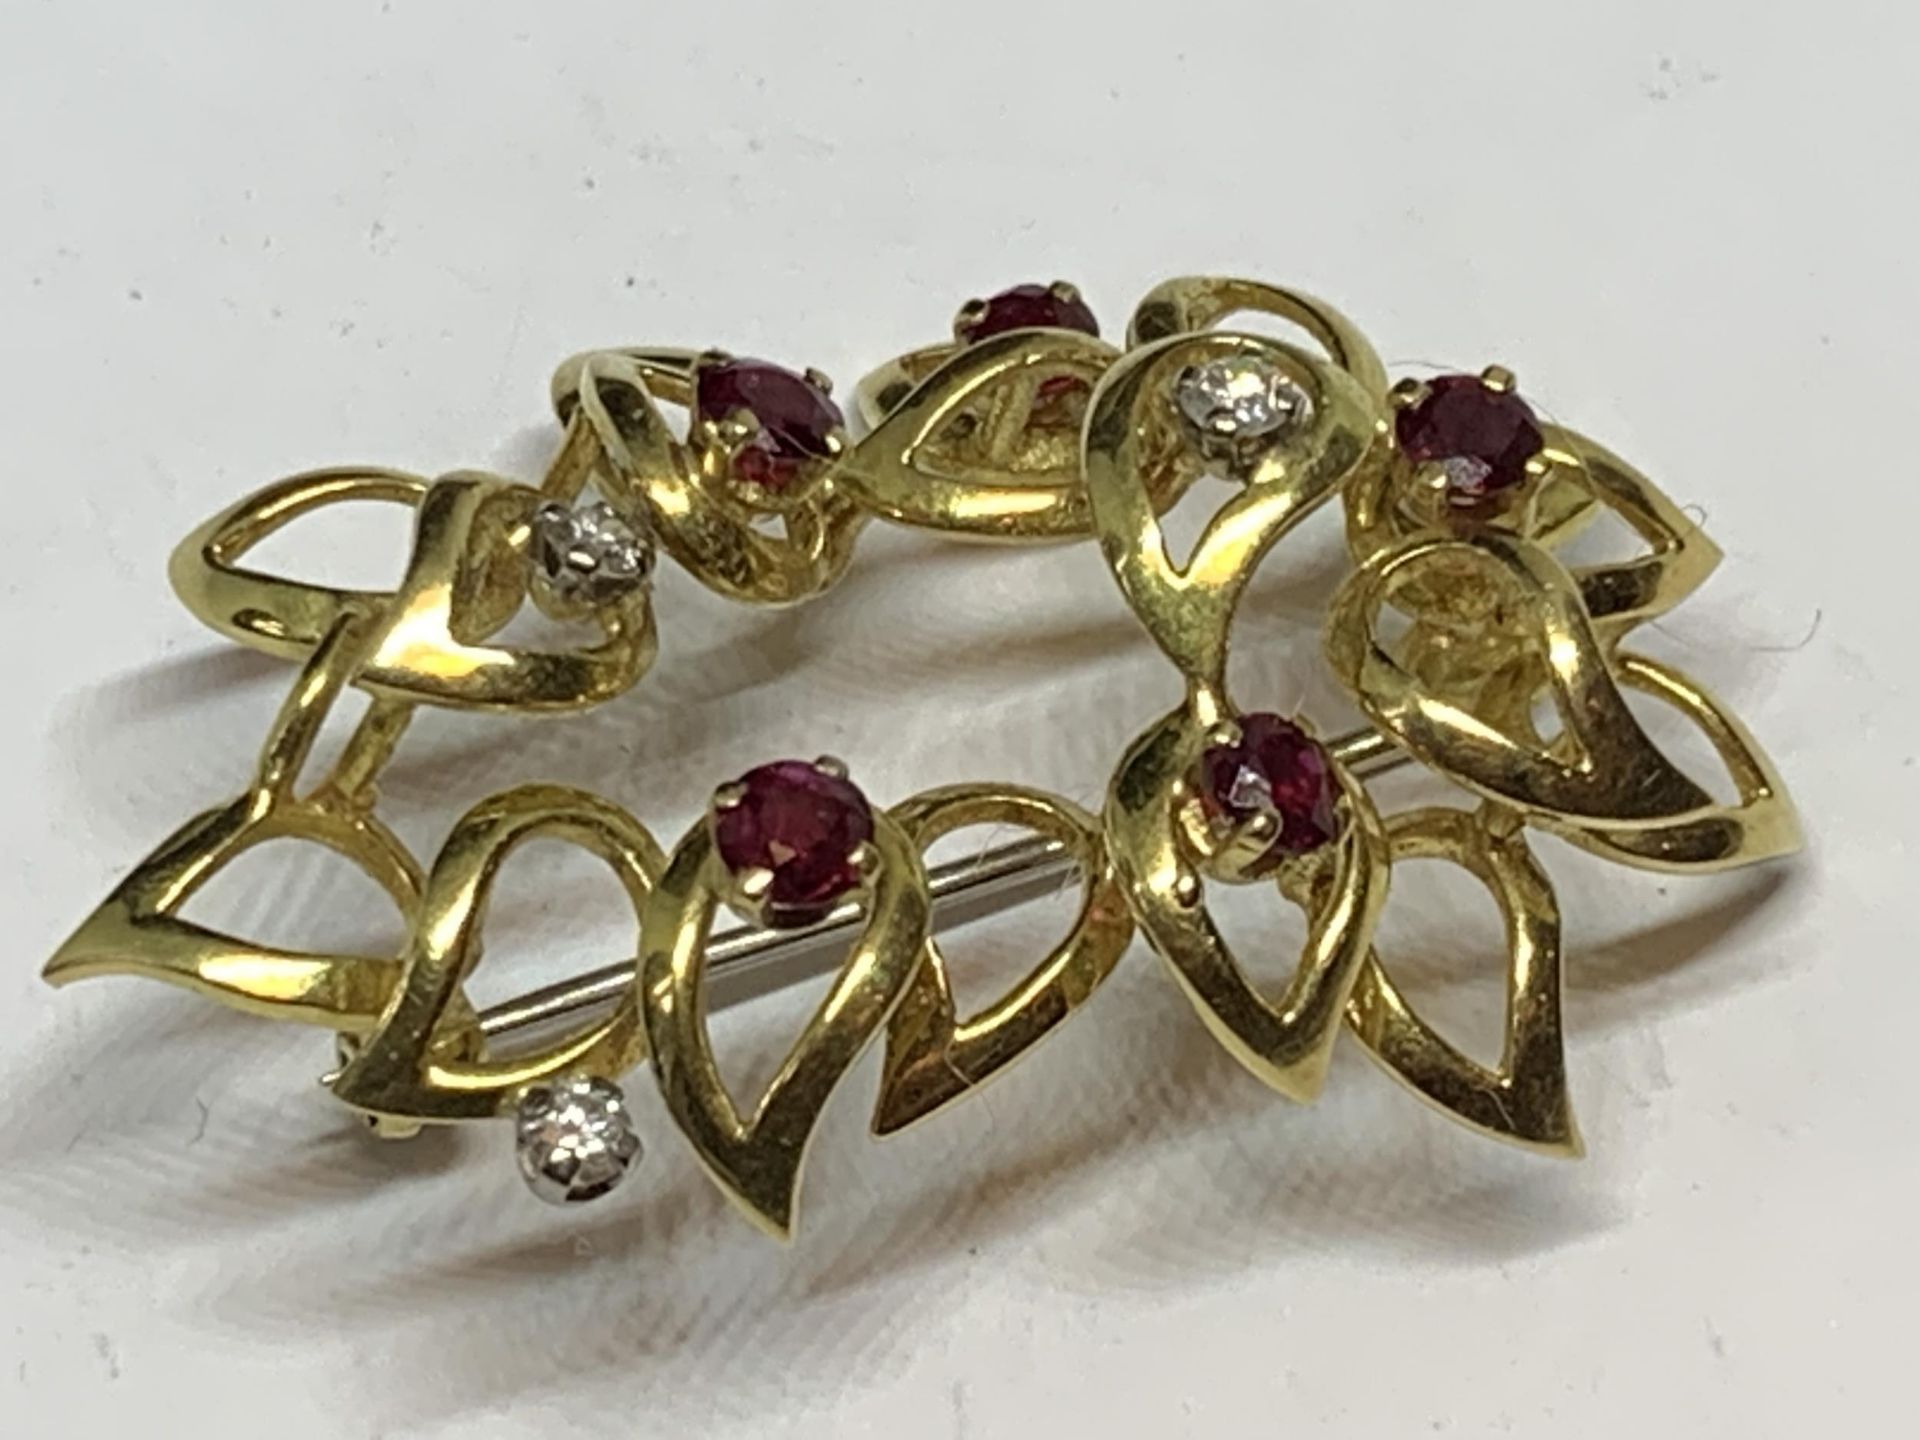 A 9 CARAT GOLD BROOCH SET WITH THREE DIAMOND AND FIVE RUBIES IN A PRESENTATION BOX